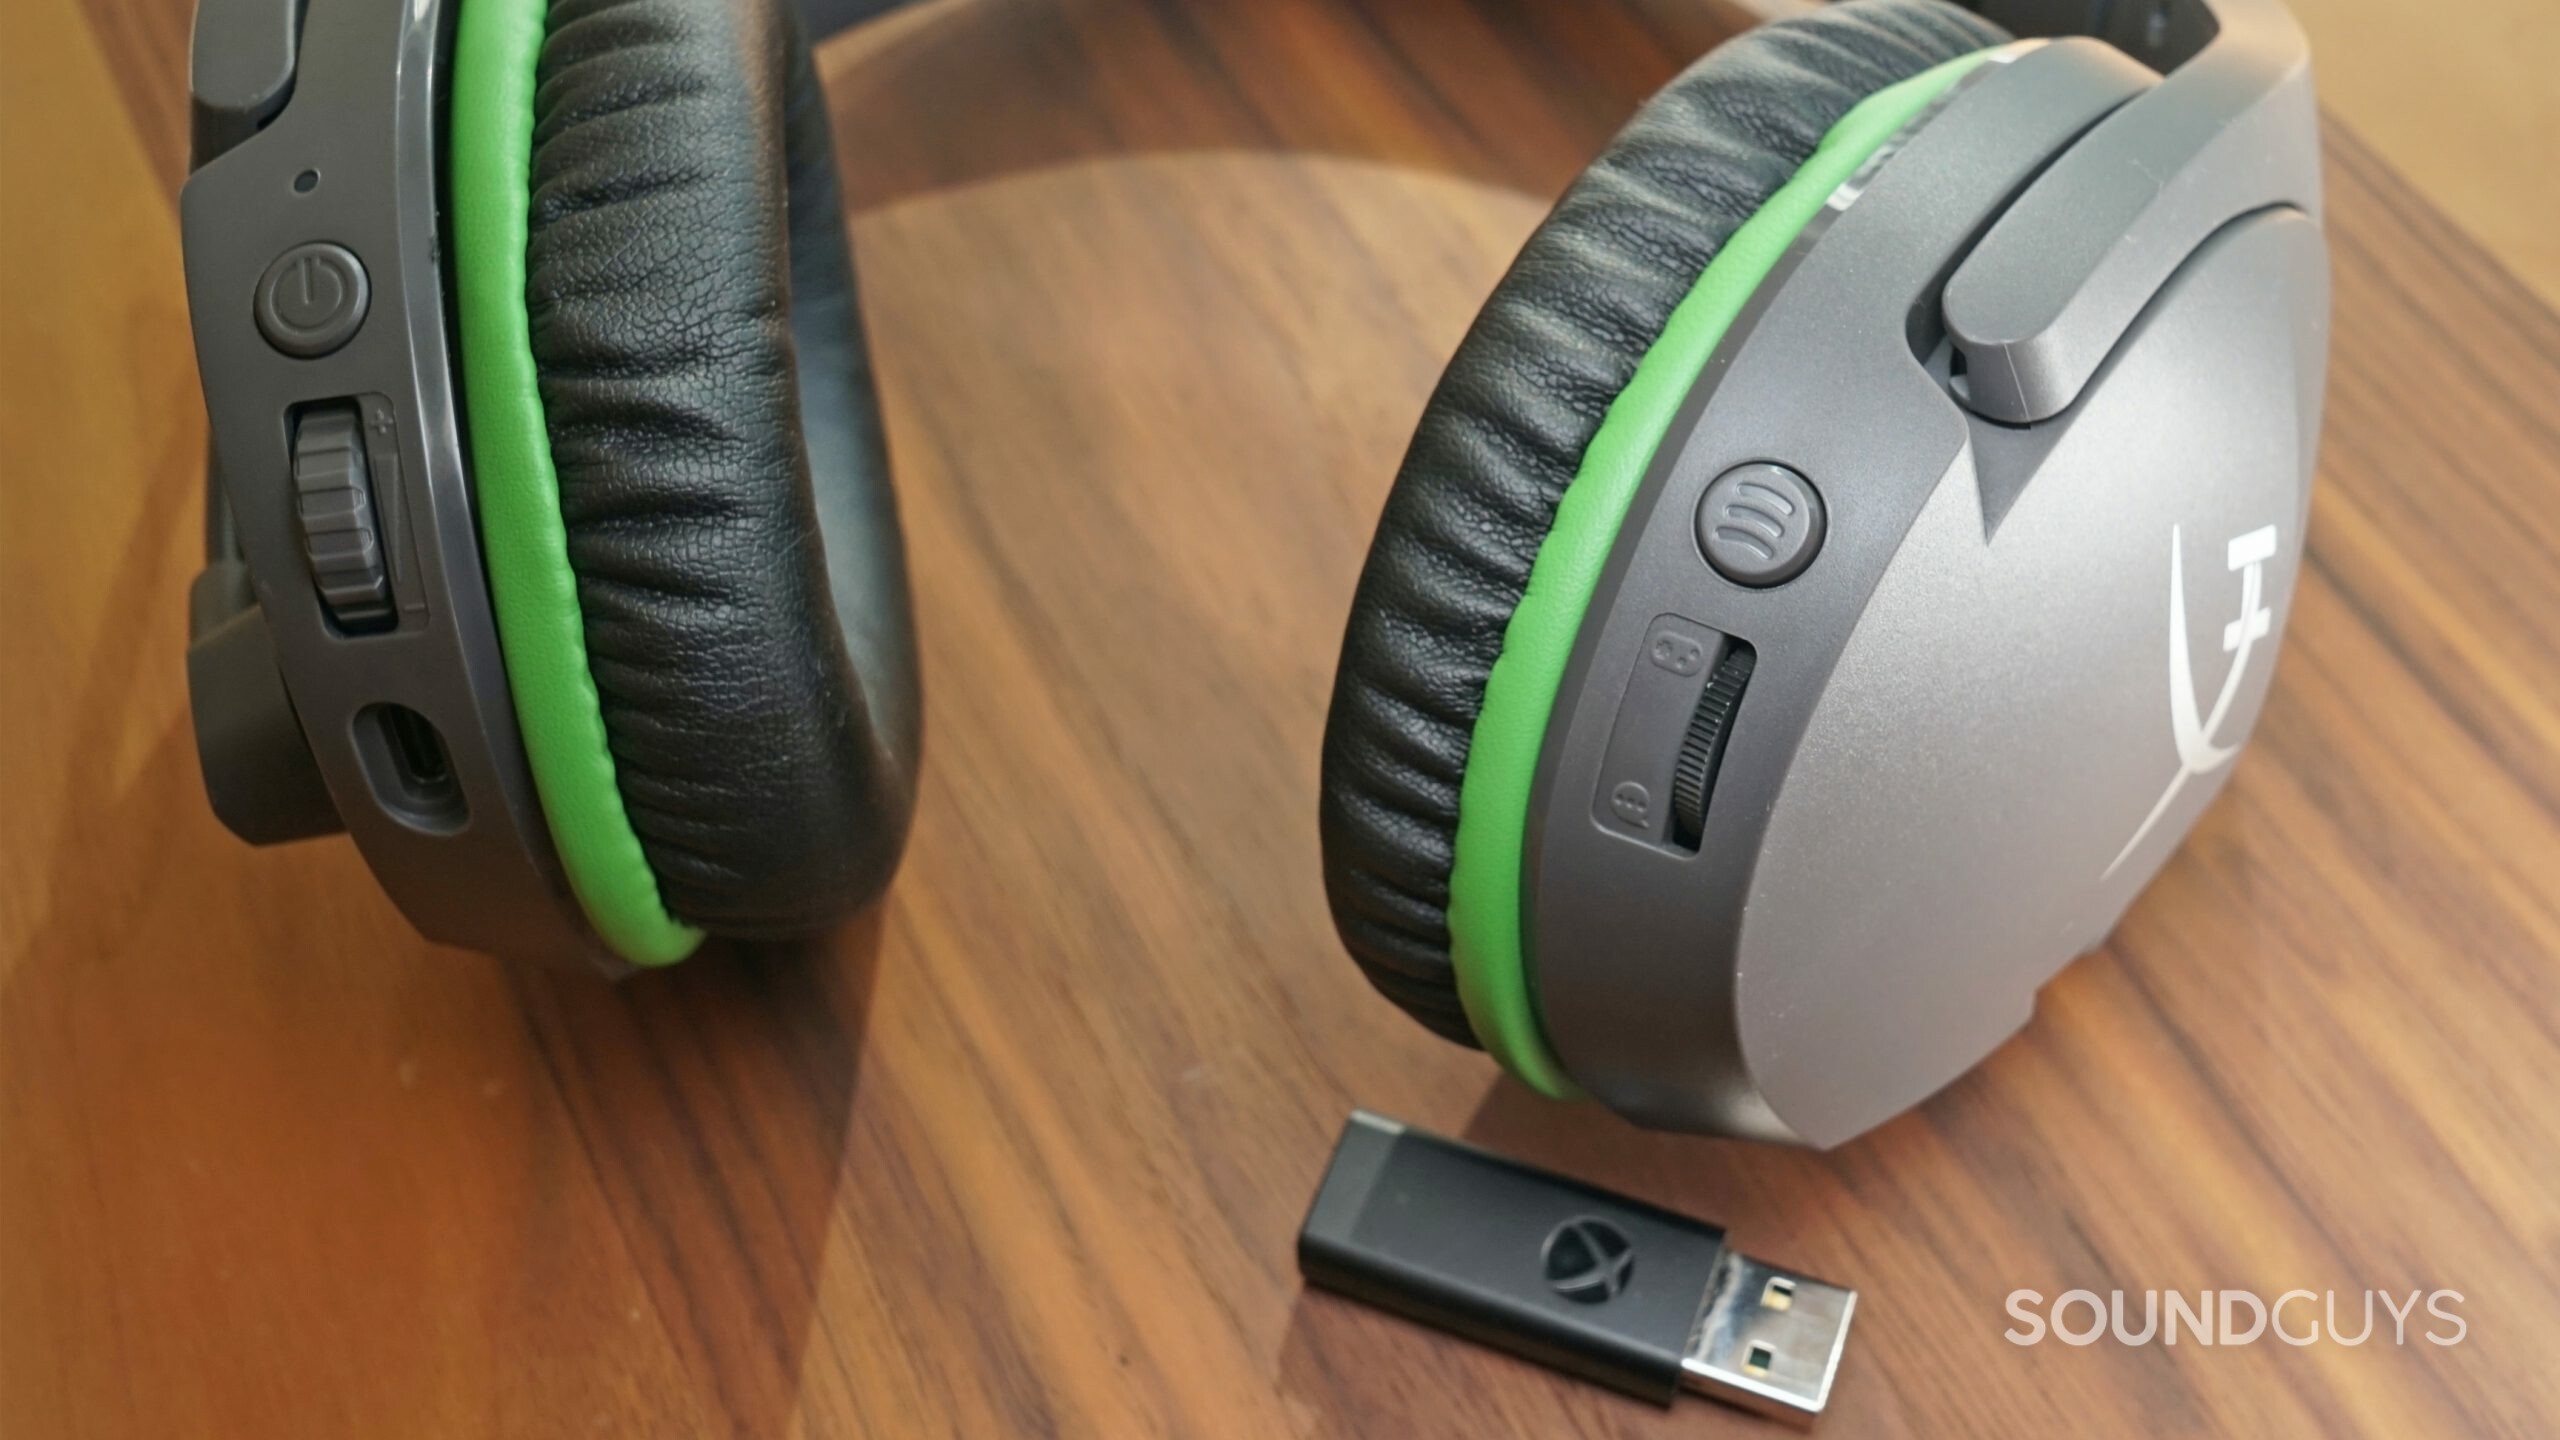 The HyperX CloudX Stinger Core lays on a wooden table next to an Xbox Wireless USB dongle